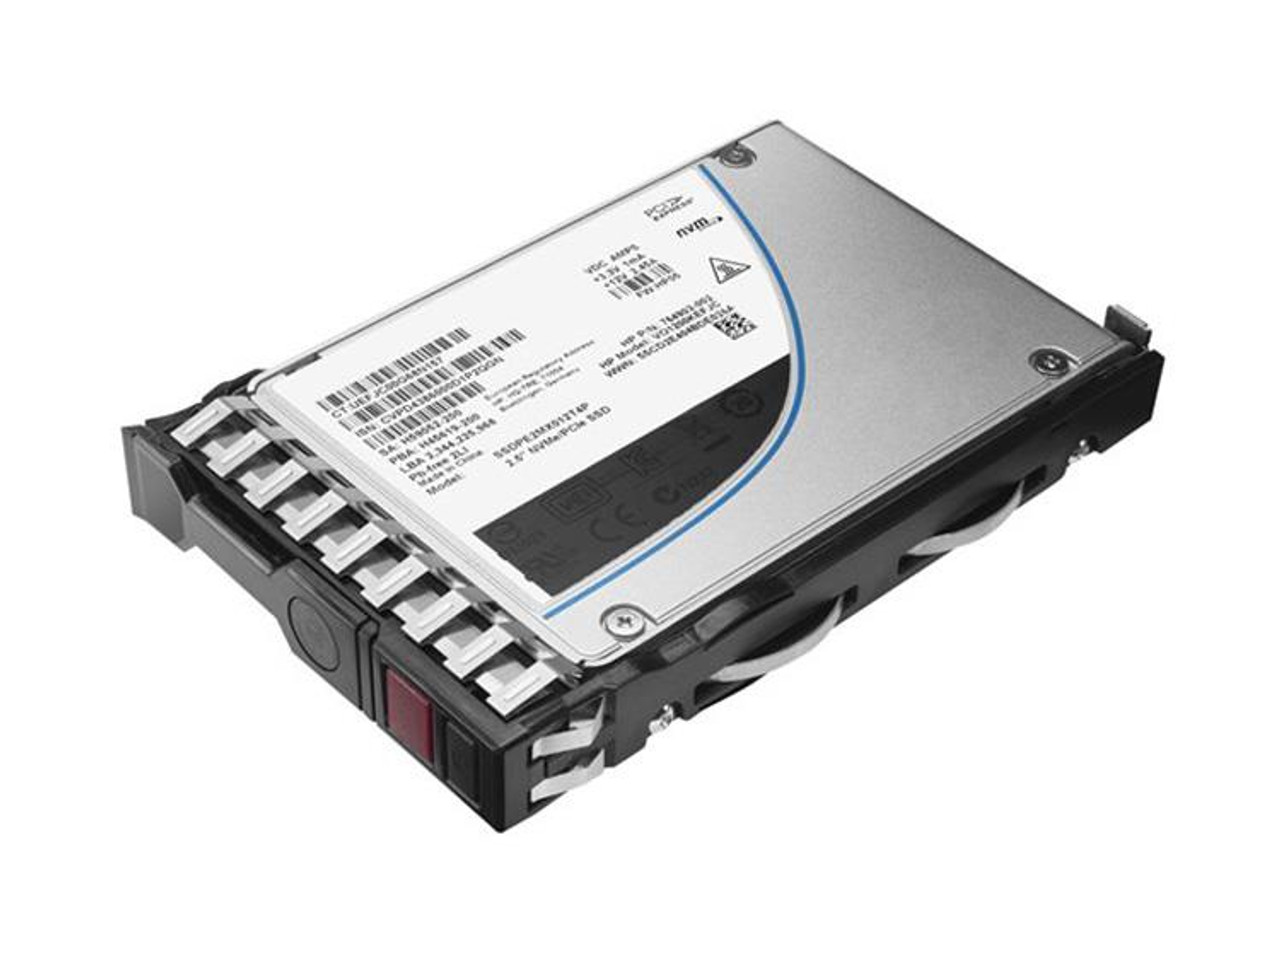 P04566-B21 HPE 1.92TB MLC SATA 6Gbps Read Intensive 2.5-inch Internal Solid State Drive (SSD) with Smart Carrier